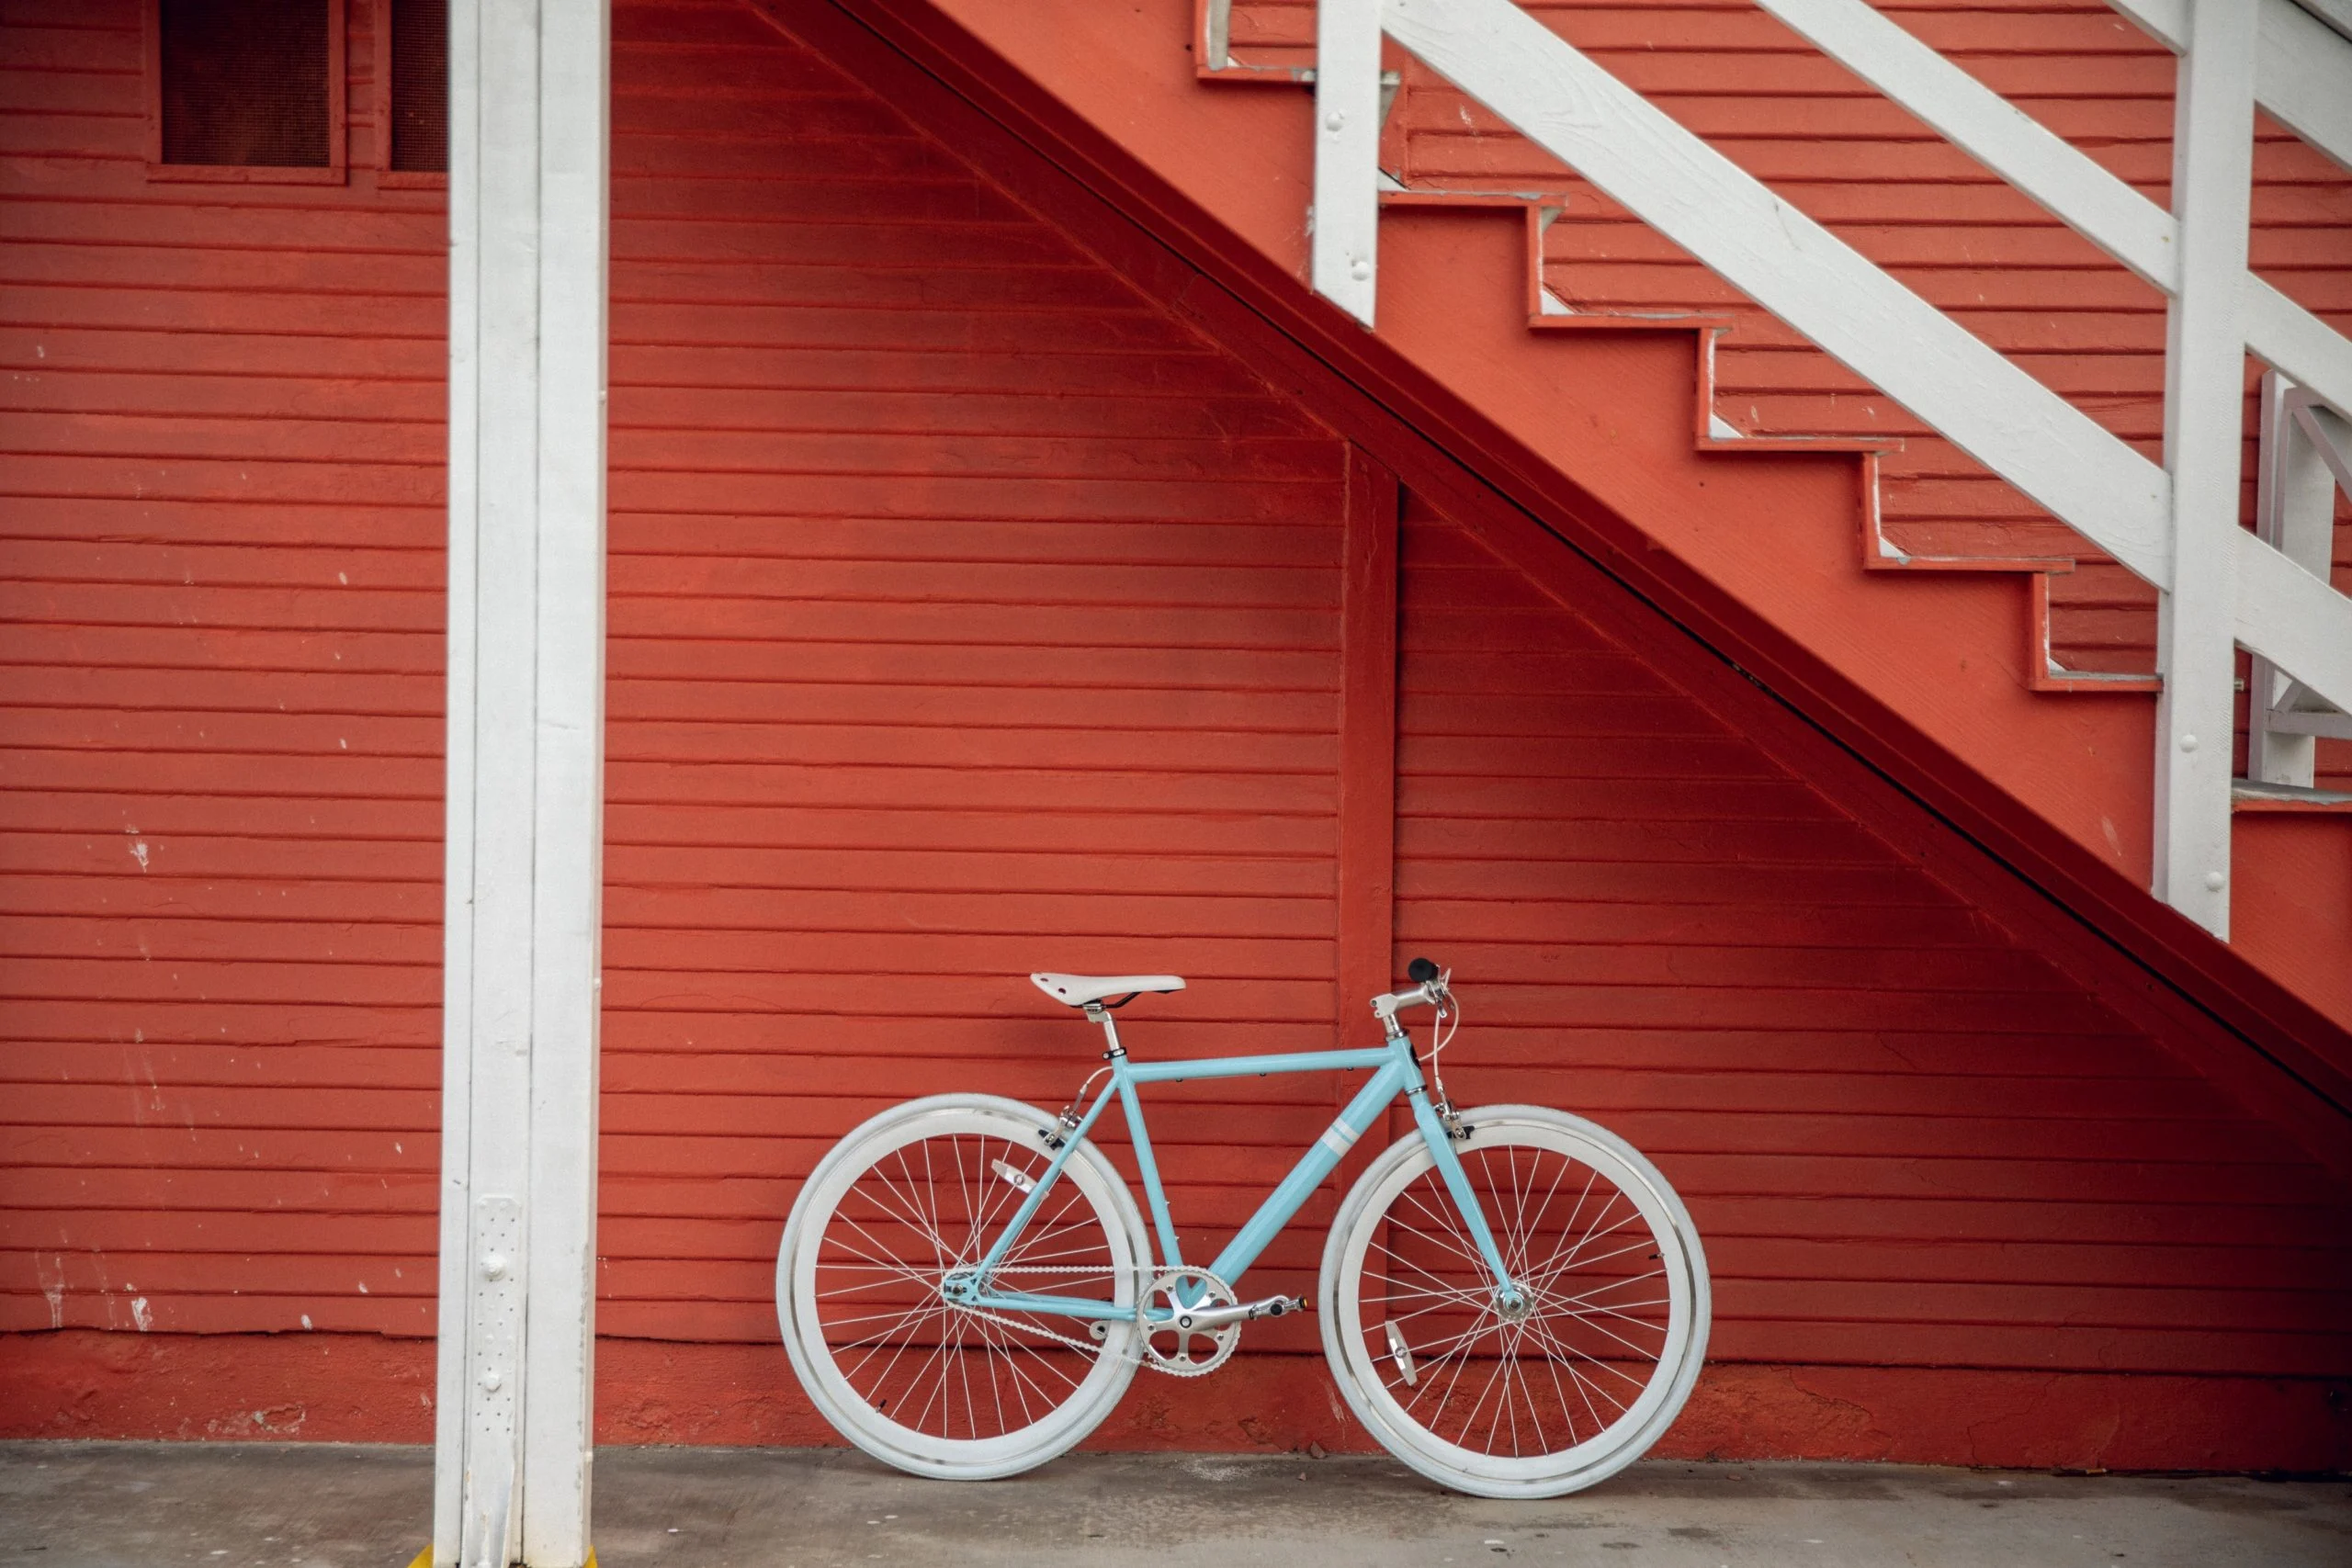 Blue and white bicycle leaning against a red painted wall in article on how to get free money.